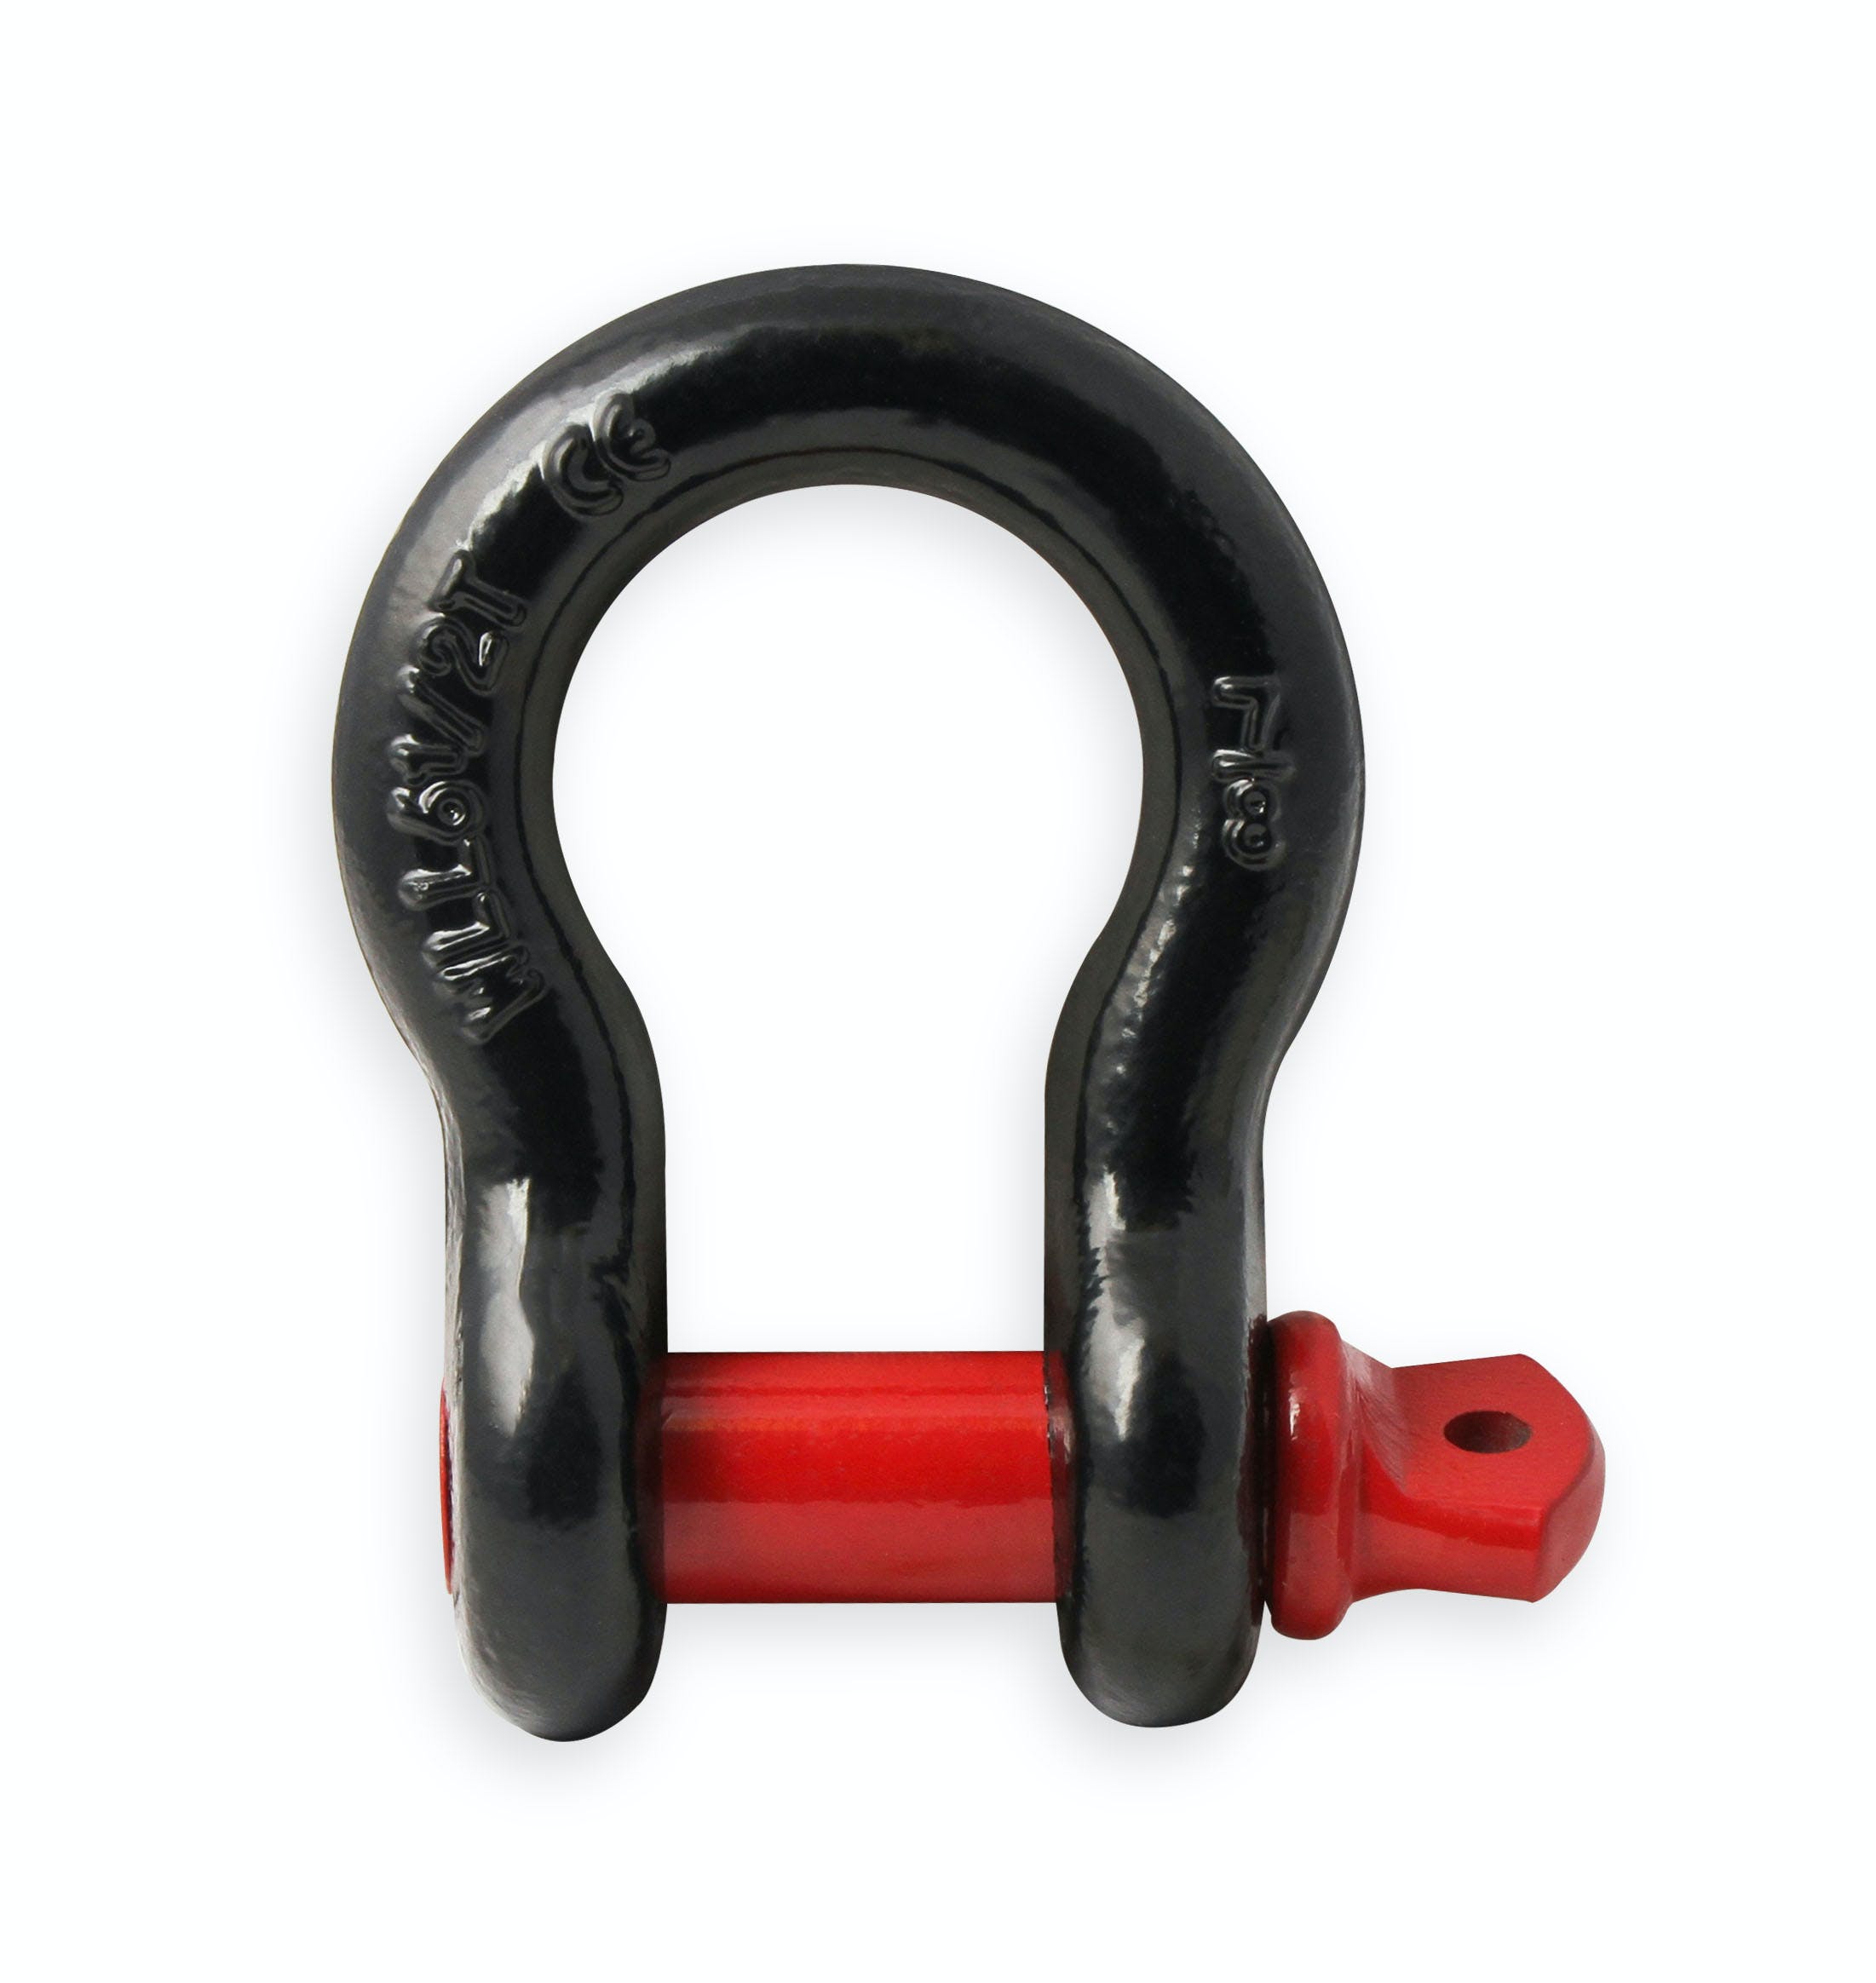 Anvil Off-Road 1091AOR BOW SHACKLE 7/8 IN. 13K LBS BLACK